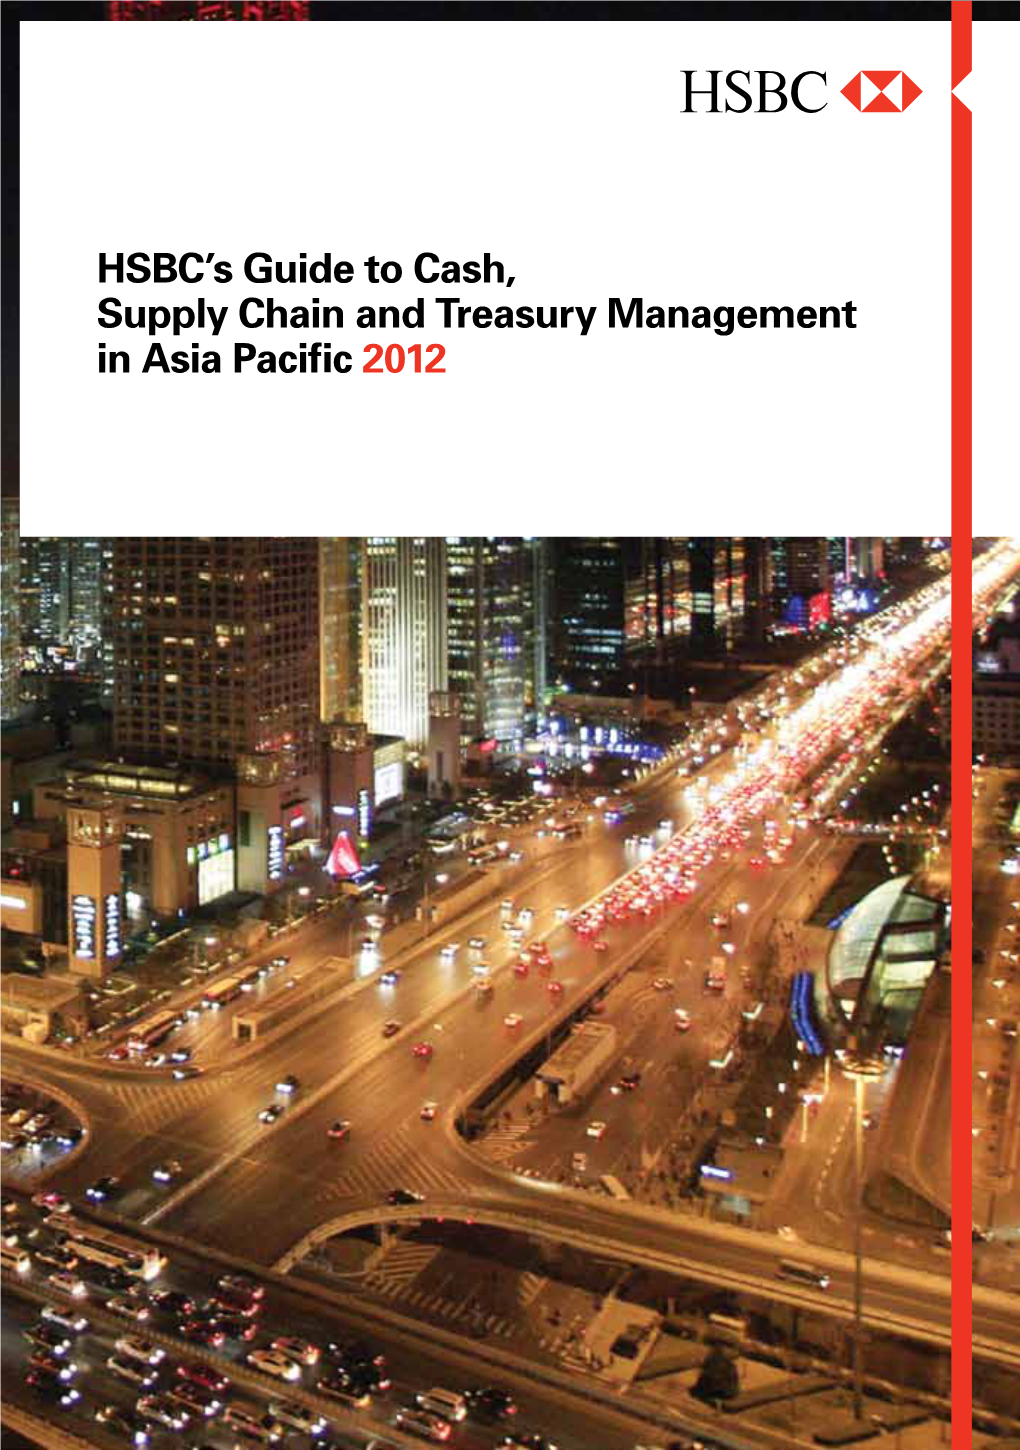 HSBC's Guide to Cash, Supply Chain and Treasury Management in Asia Pacific